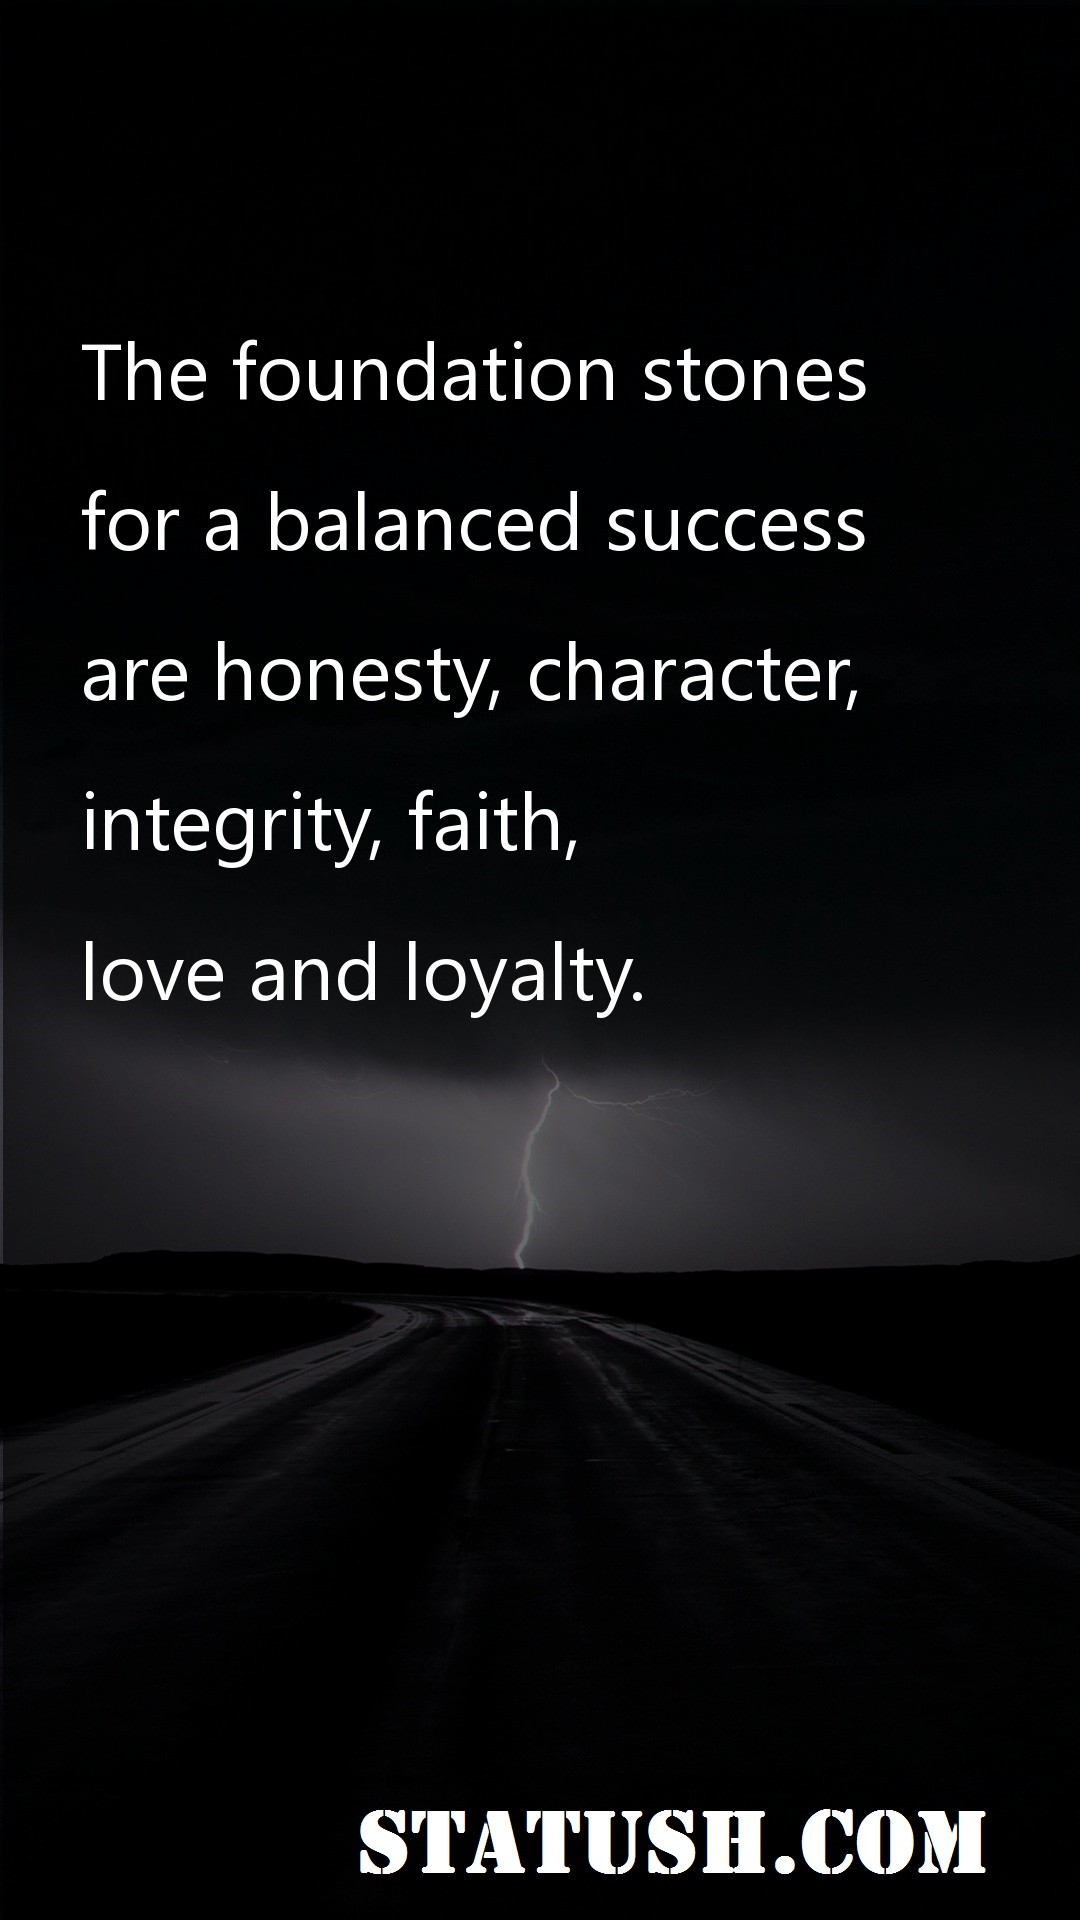 The foundation stones for a balanced success